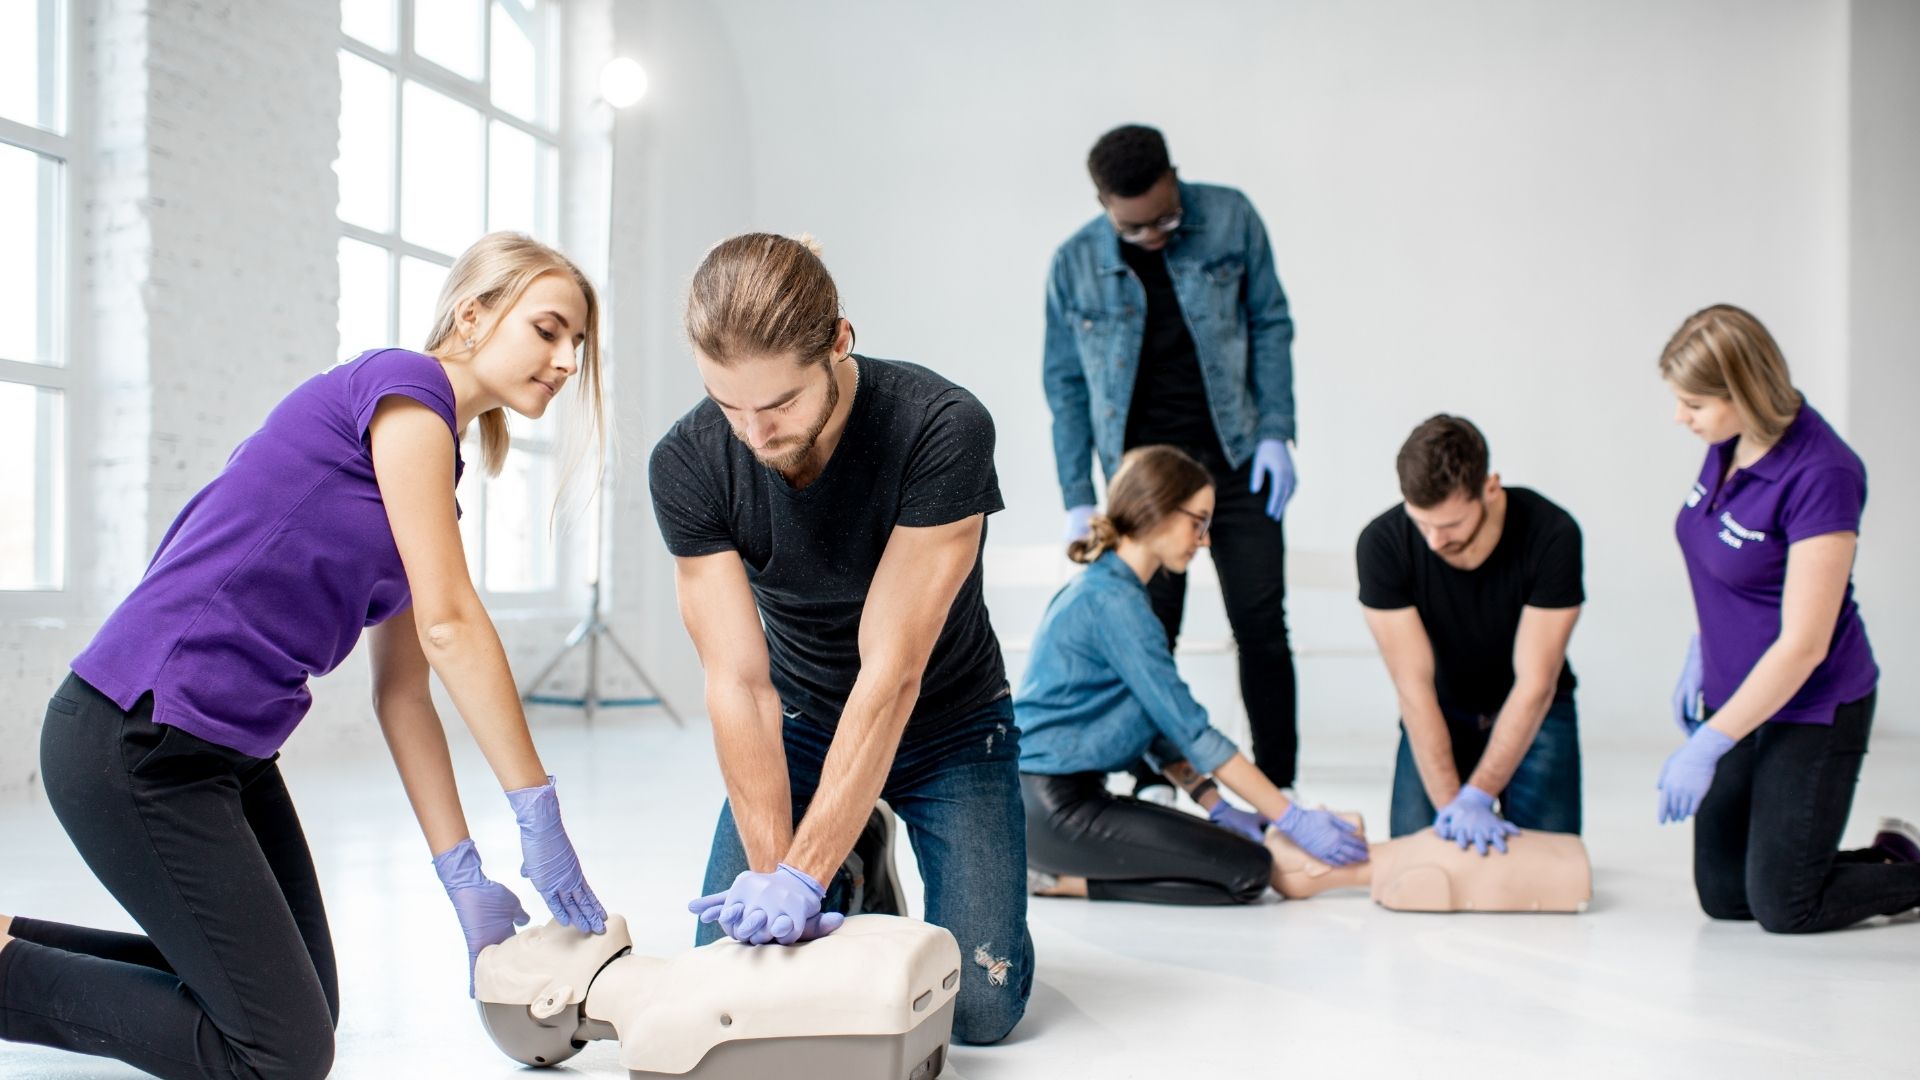 What is the good samaritan law for CPR